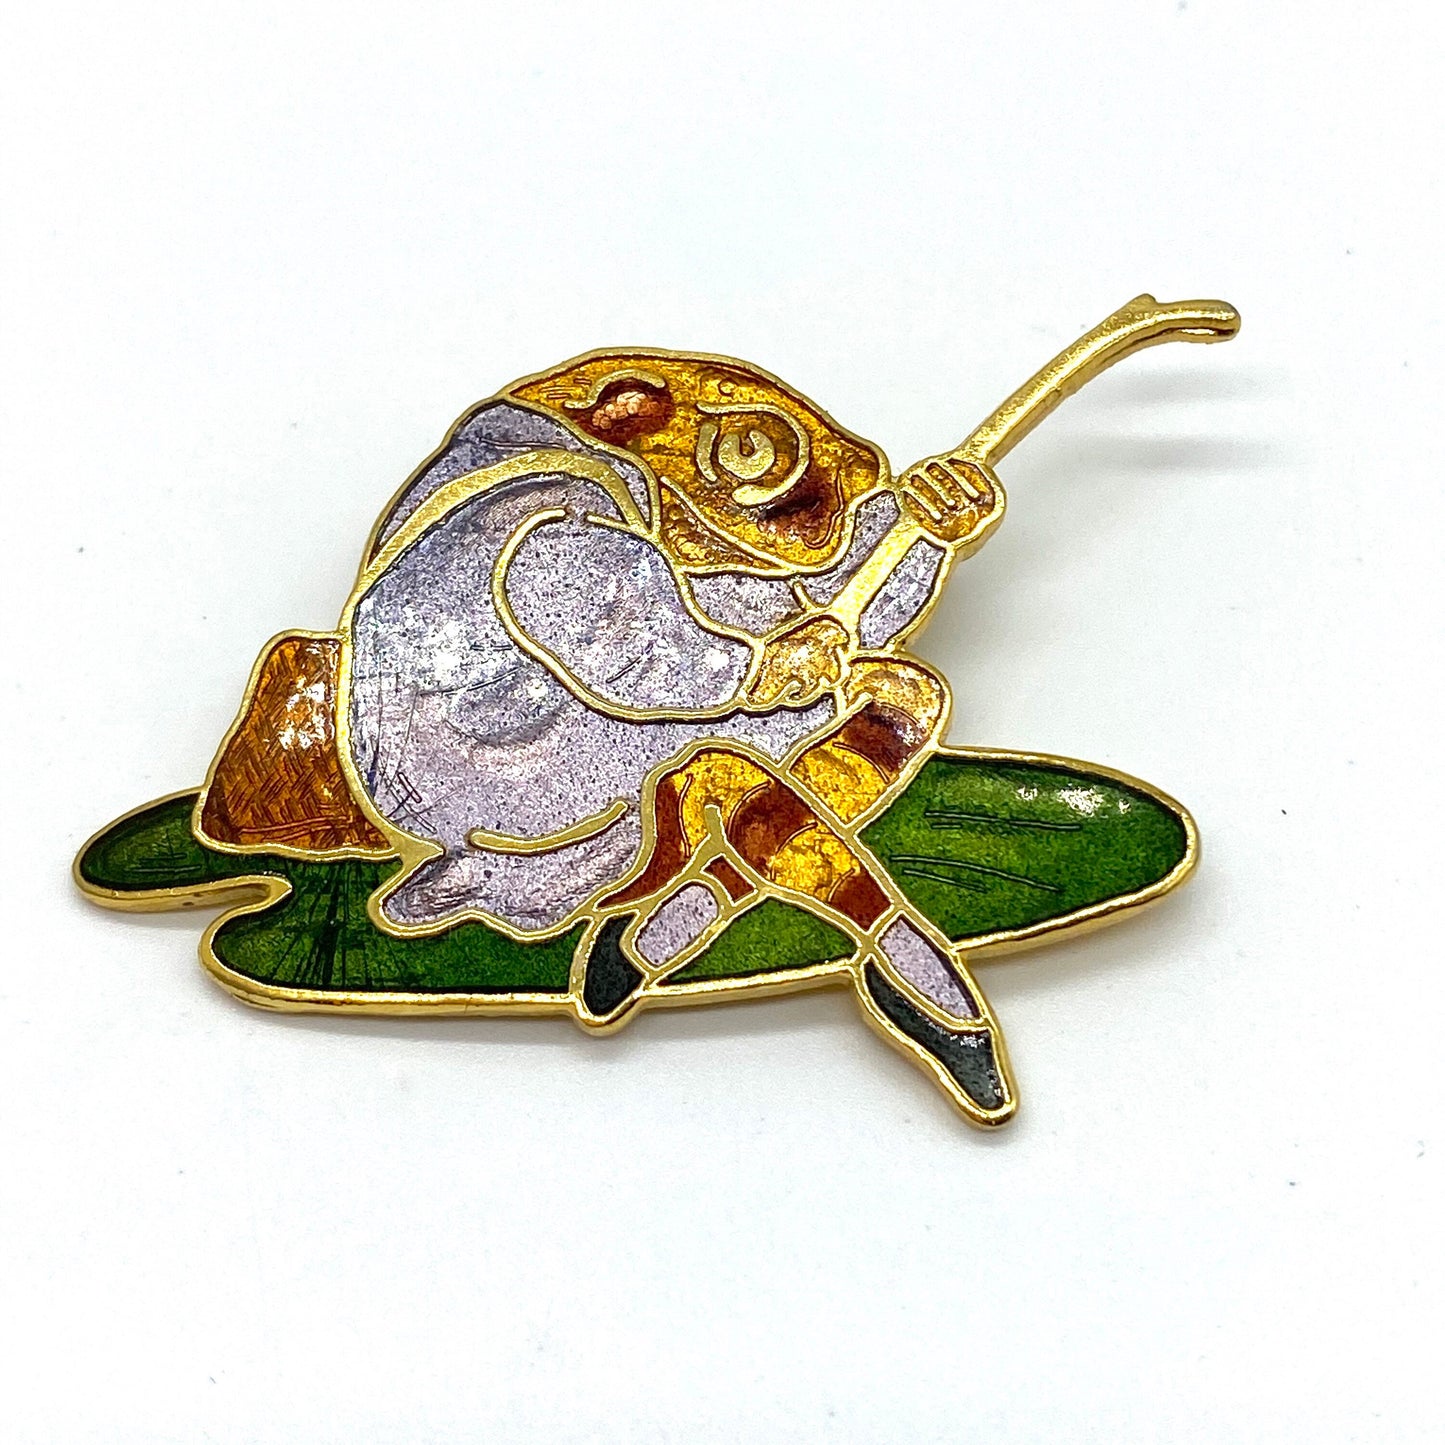 Cloisonne Brooch by Fish FW & Co